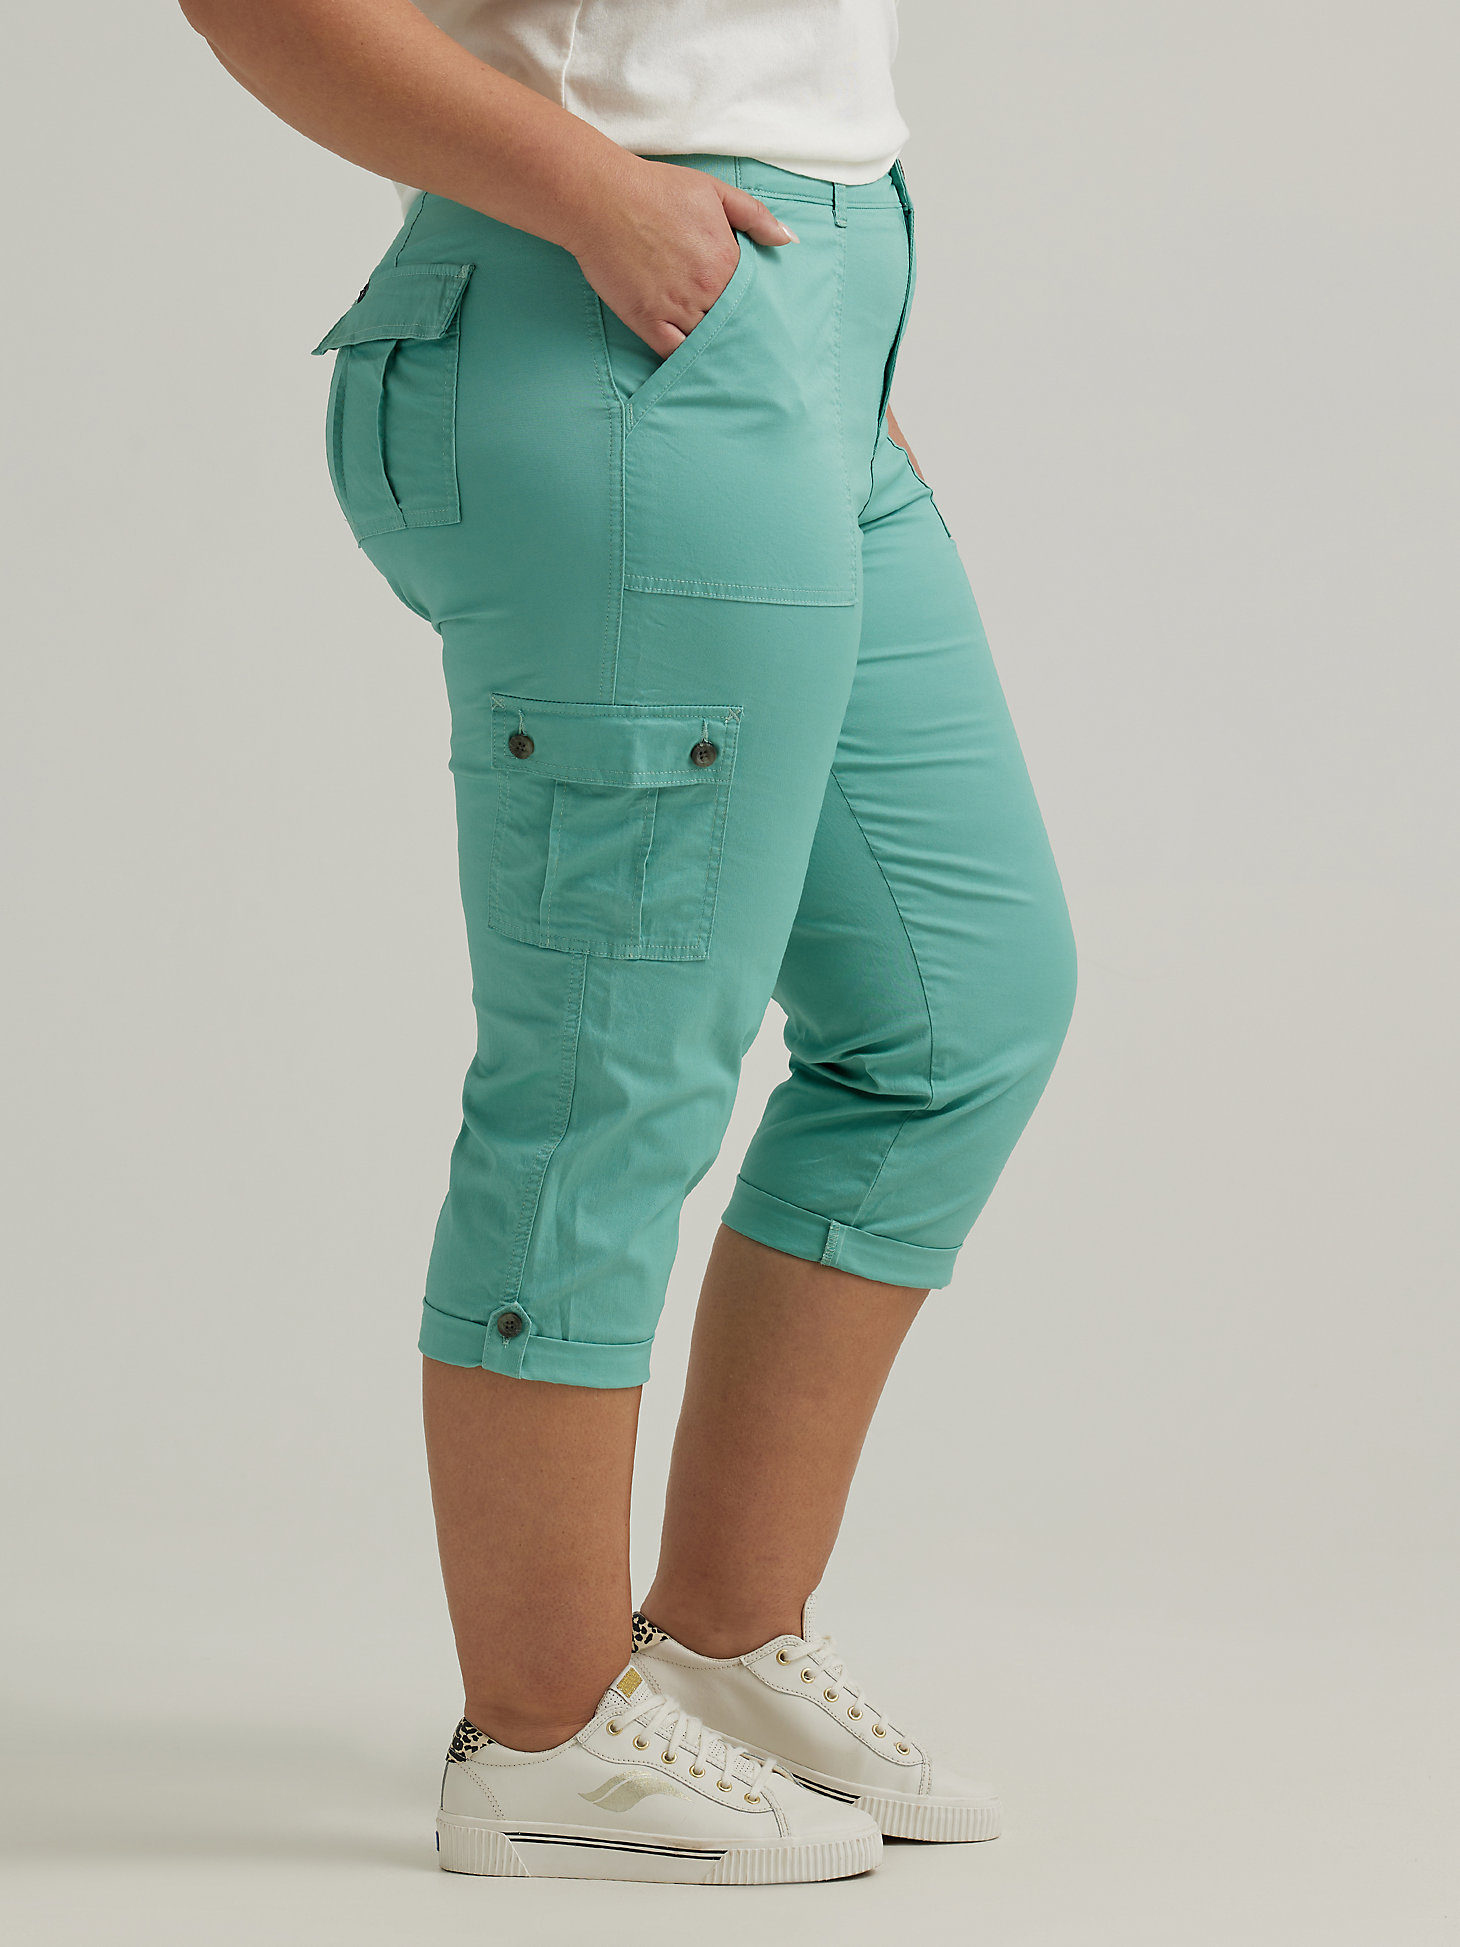 Women's Ultra Lux with Flex-To-Go Relaxed Cargo Capri (Plus) in Dusty Jade alternative view 2